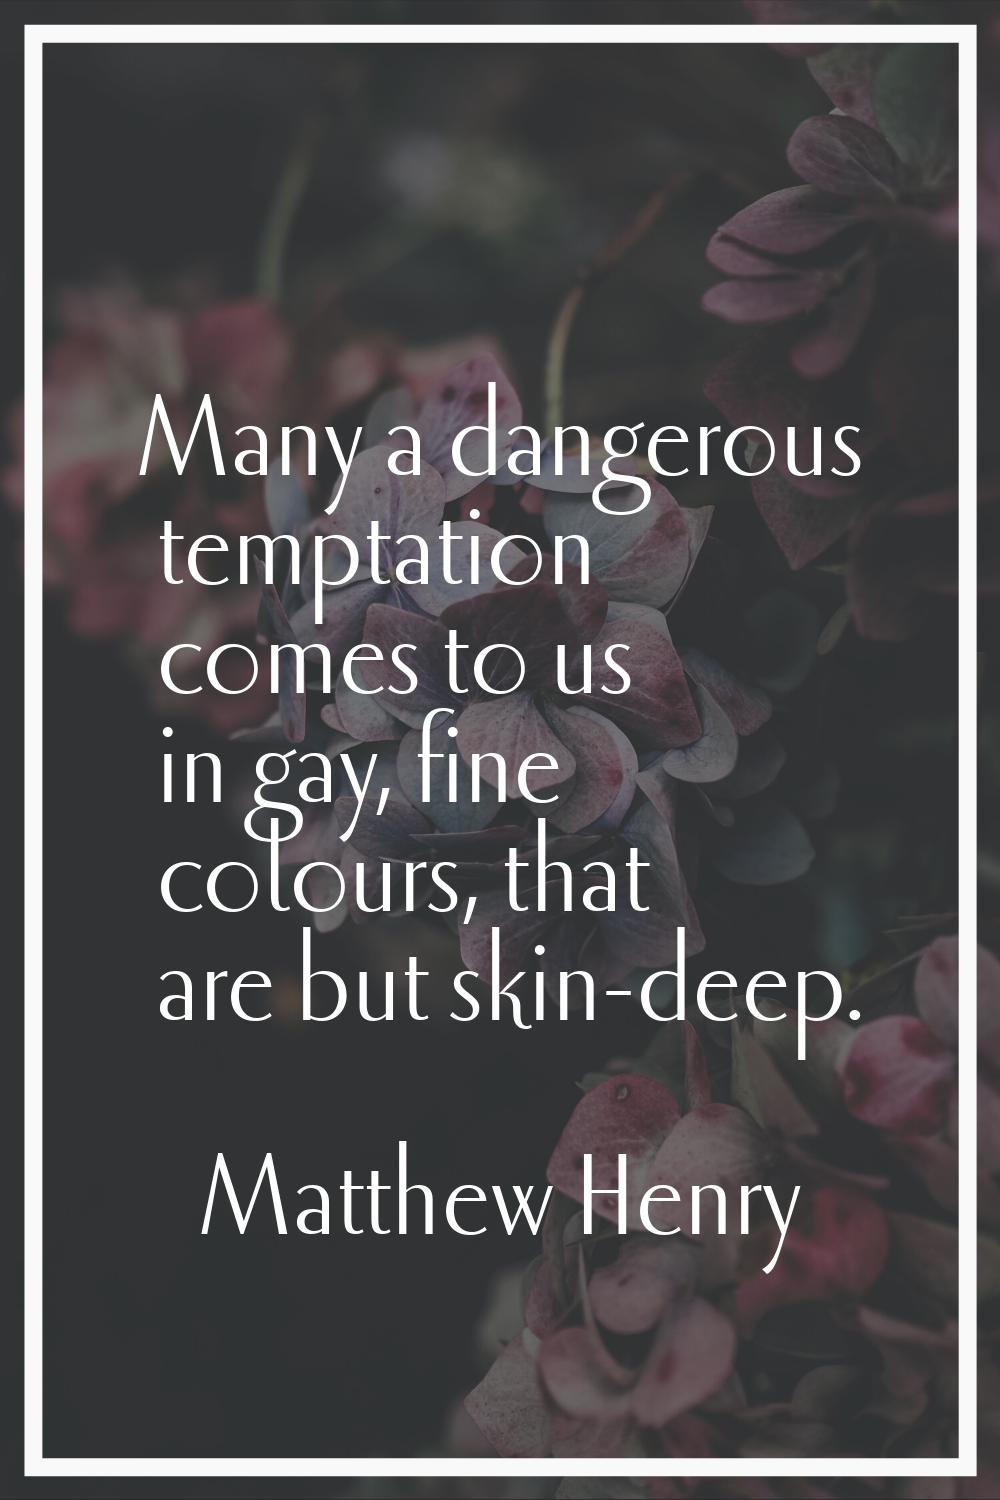 Many a dangerous temptation comes to us in gay, fine colours, that are but skin-deep.